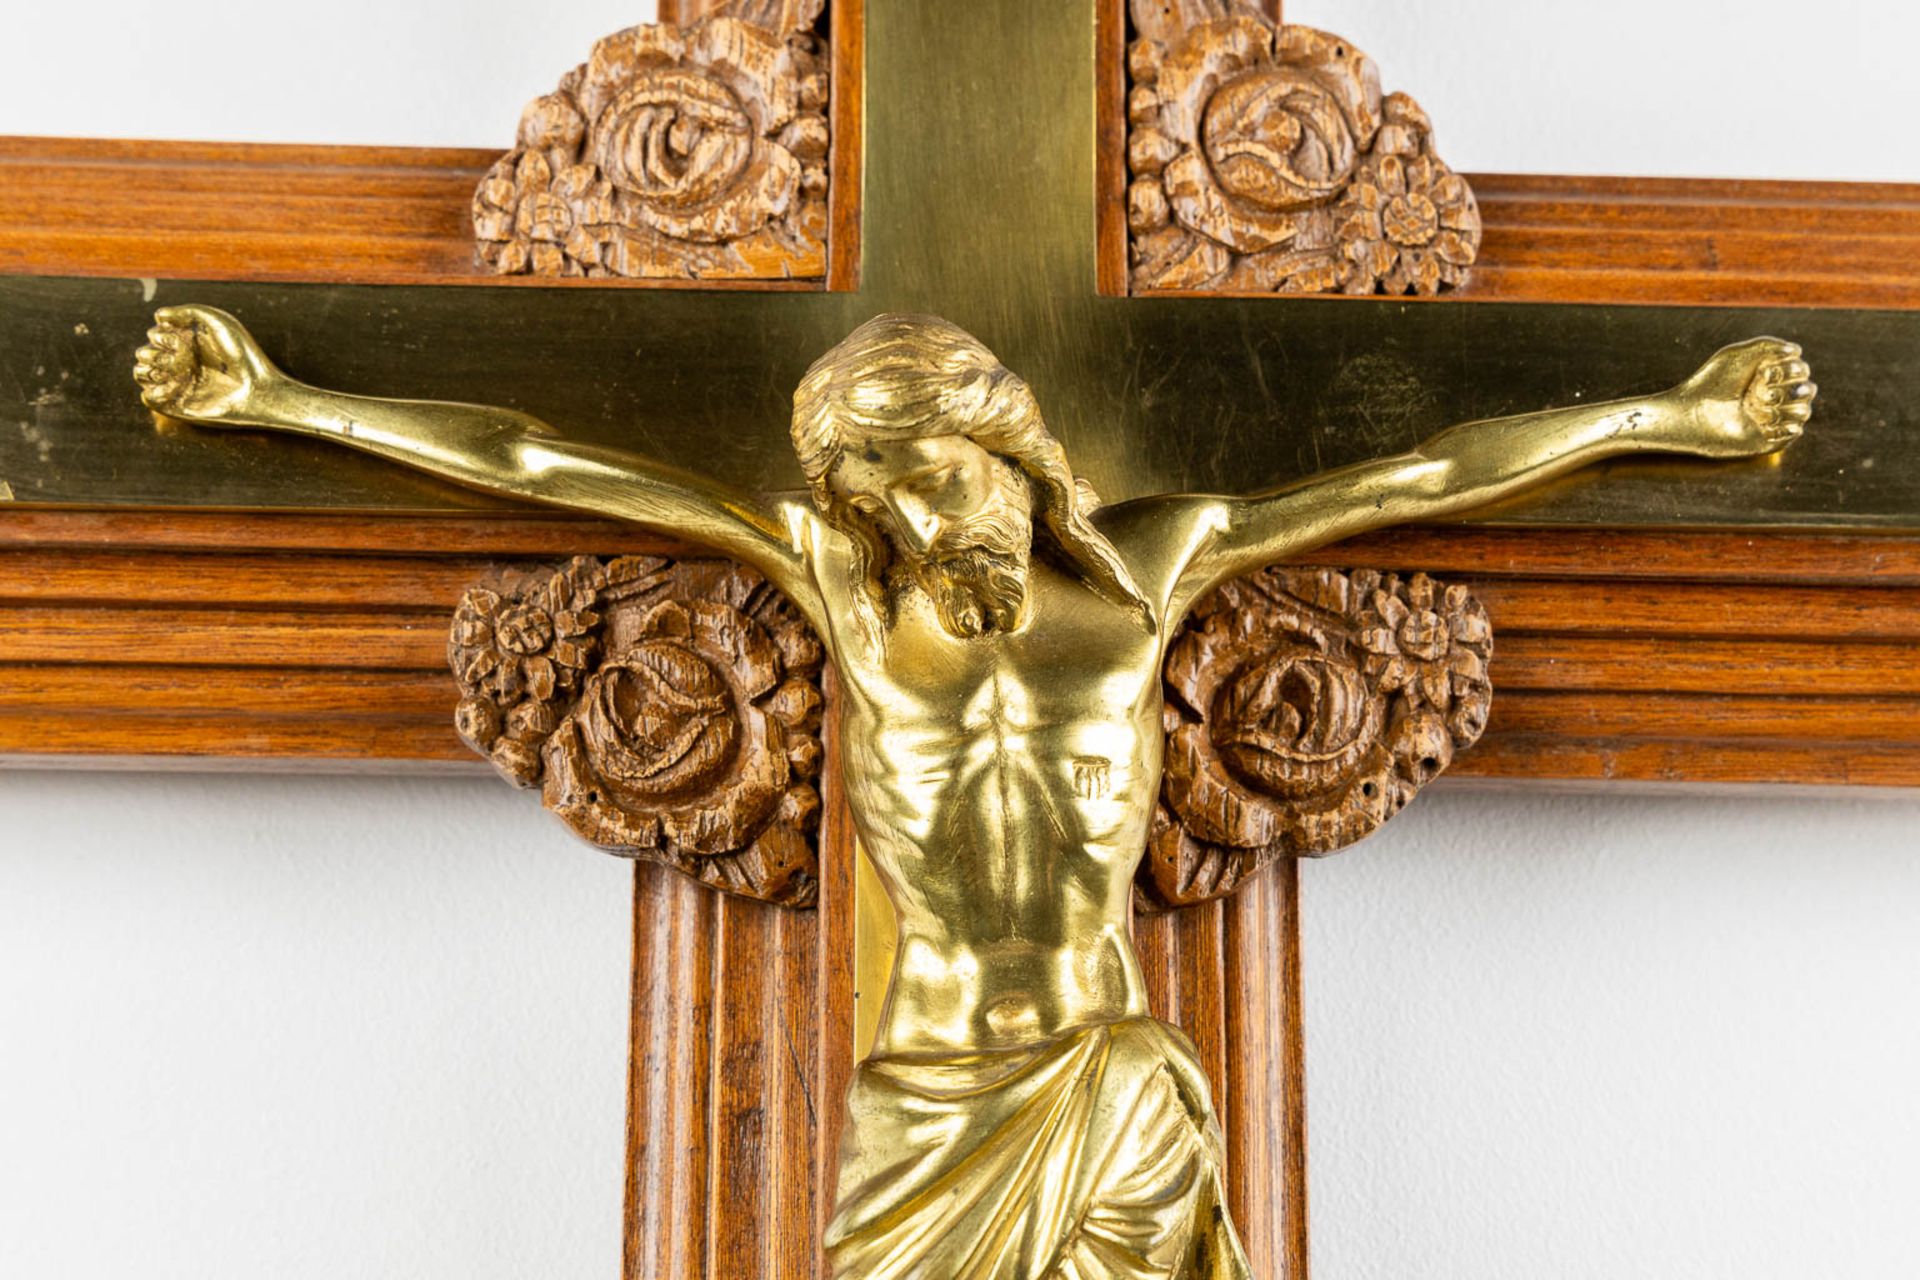 A crucifix with small holy water font, bronze mounted on wood. (W:41 x H:60 cm) - Image 6 of 9